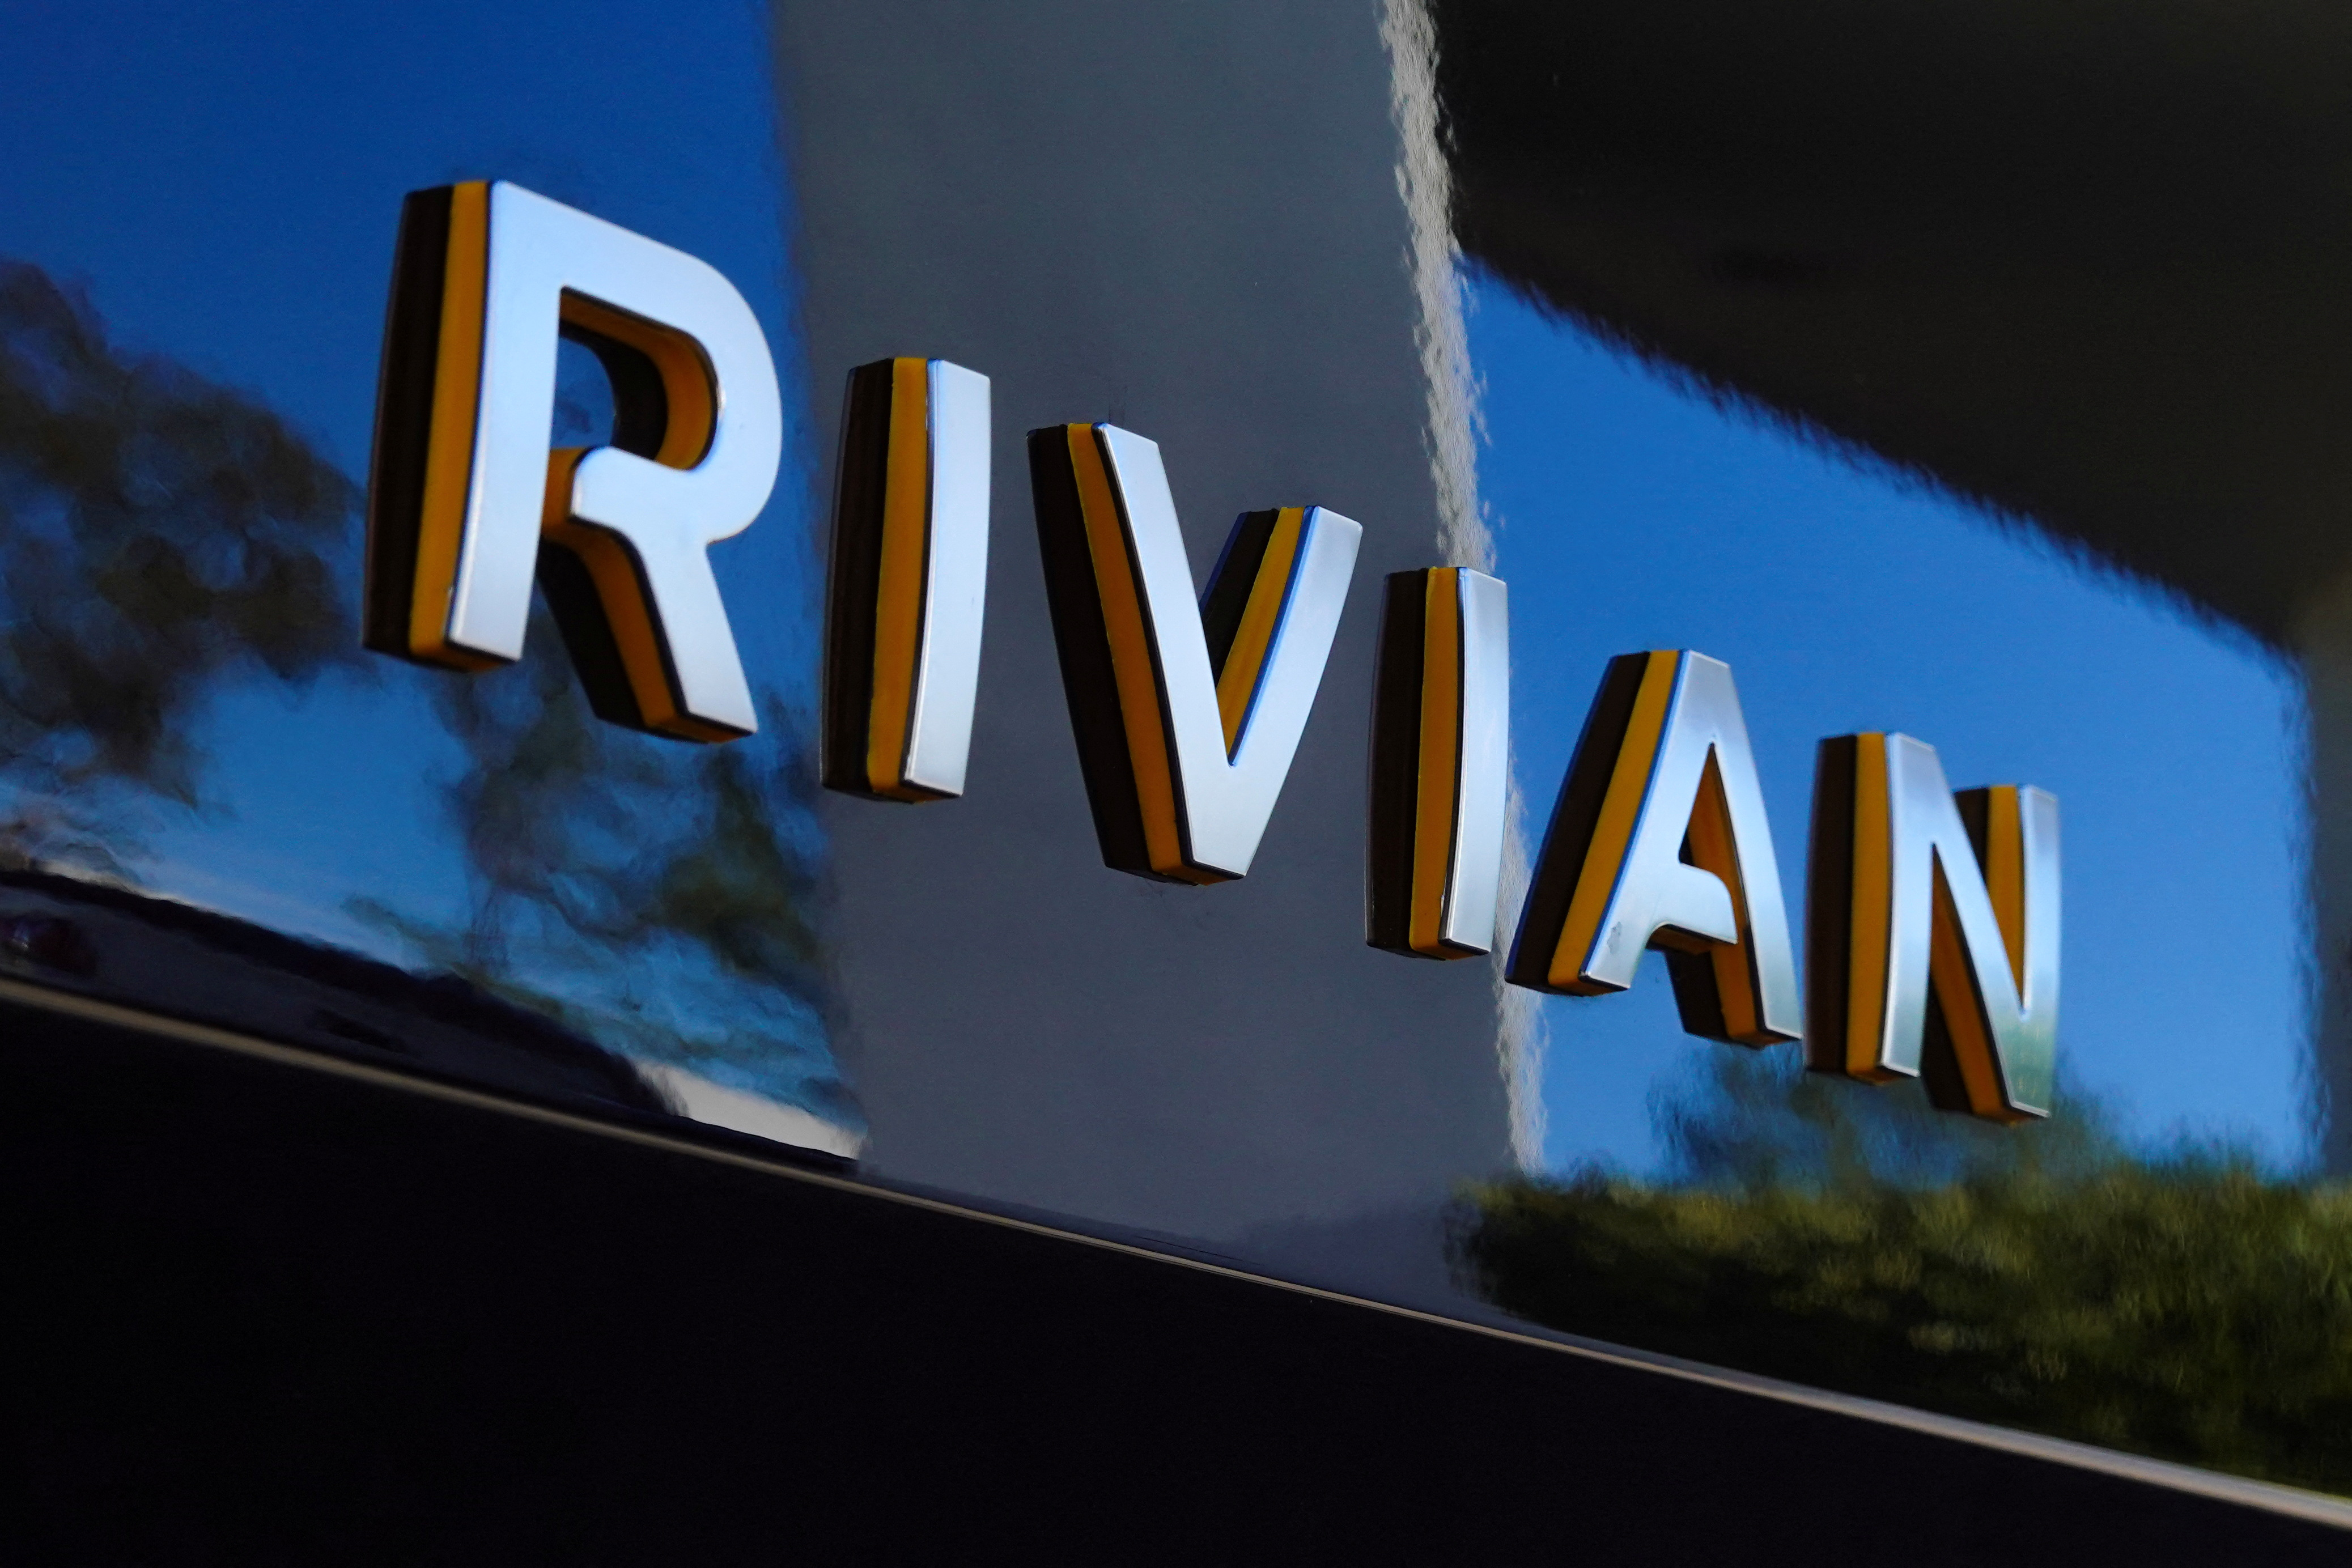 Rivian stock is on fire. Here's why.